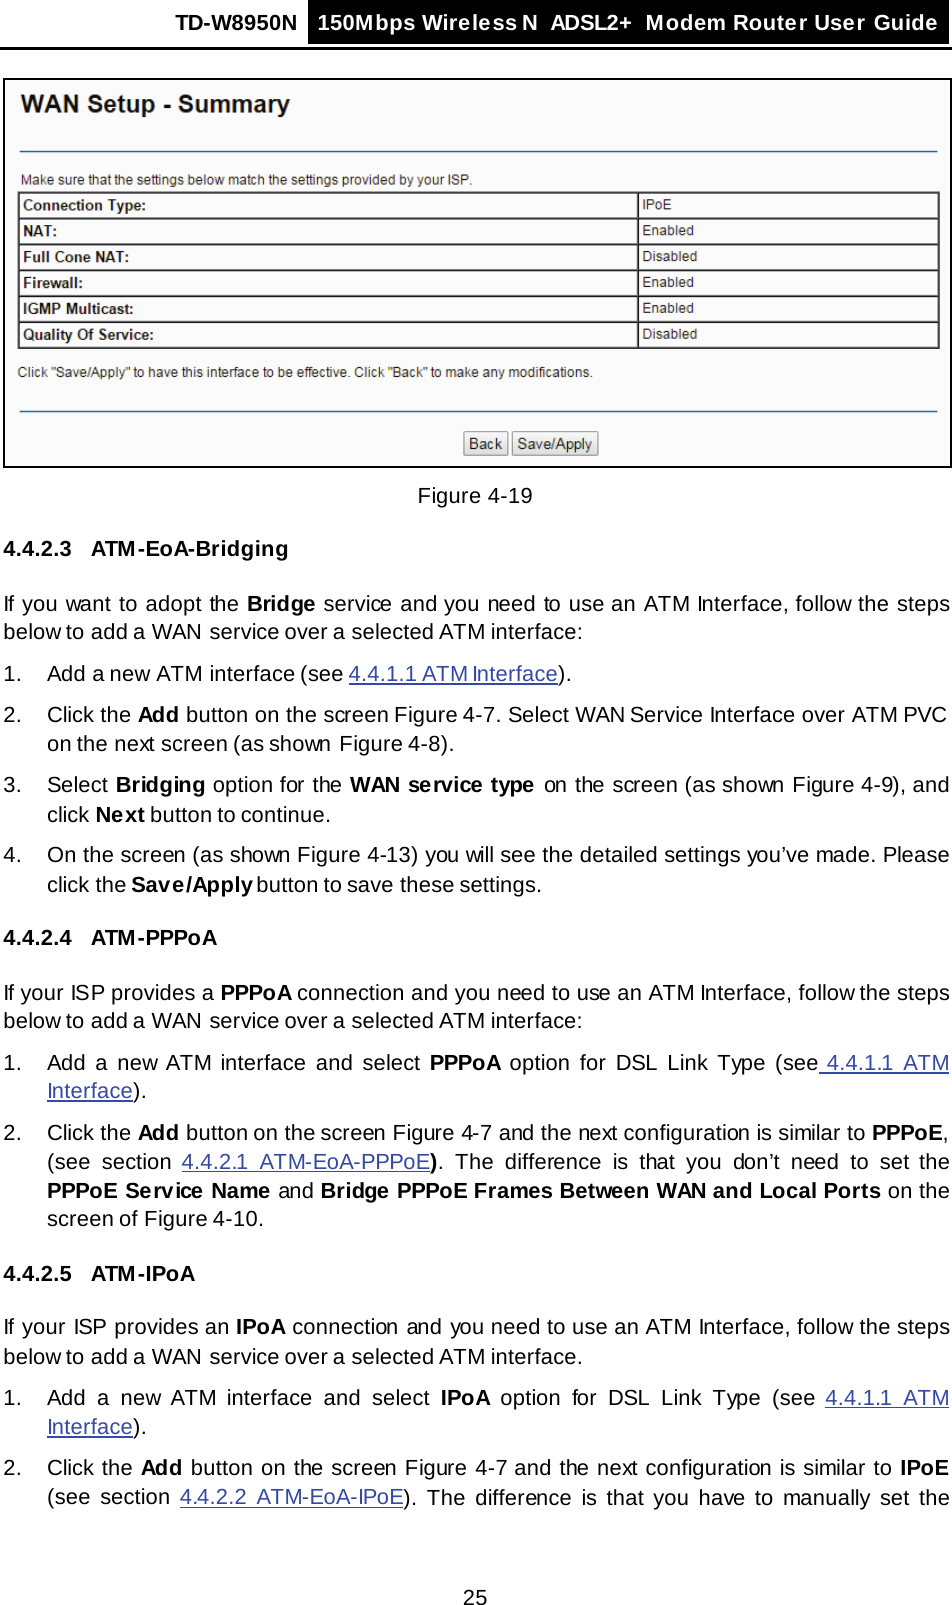 TD-W8950N 150Mbps Wireless N  ADSL2+ Modem Router User Guide  25  Figure 4-19 4.4.2.3 ATM -EoA-Bridging If you want to adopt the Bridge service and you need to use an ATM Interface, follow the steps below to add a WAN  service over a selected ATM interface: 1.  Add a new ATM interface (see 4.4.1.1 ATM Interface). 2. Click the Add button on the screen Figure 4-7. Select WAN Service Interface over ATM PVC on the next screen (as shown Figure 4-8). 3.  Select Bridging option for the WAN service type on the screen (as shown Figure 4-9), and click Next button to continue. 4. On the screen (as shown Figure 4-13) you will see the detailed settings you’ve made. Please click the Save/Apply button to save these settings. 4.4.2.4 ATM -PPPoA If your ISP provides a PPPoA connection and you need to use an ATM Interface, follow the steps below to add a WAN  service over a selected ATM interface: 1.  Add a new ATM  interface and select PPPoA option for DSL Link Type (see 4.4.1.1 ATM Interface). 2. Click the Add button on the screen Figure 4-7 and the next configuration is similar to PPPoE, (see section 4.4.2.1 ATM-EoA-PPPoE).  The difference is that you don’t need to set the PPPoE Service Name and Bridge PPPoE Frames Between WAN and Local Ports on the screen of Figure 4-10. 4.4.2.5 ATM -IPoA If your ISP provides an IPoA connection and you need to use an ATM Interface, follow the steps below to add a WAN  service over a selected ATM interface. 1.  Add a new ATM  interface and select IPoA option for DSL Link Type (see 4.4.1.1 ATM Interface). 2. Click the Add button on the screen Figure 4-7 and the next configuration is similar to IPoE (see section 4.4.2.2 ATM-EoA-IPoE).  The difference is that you have to manually set the 